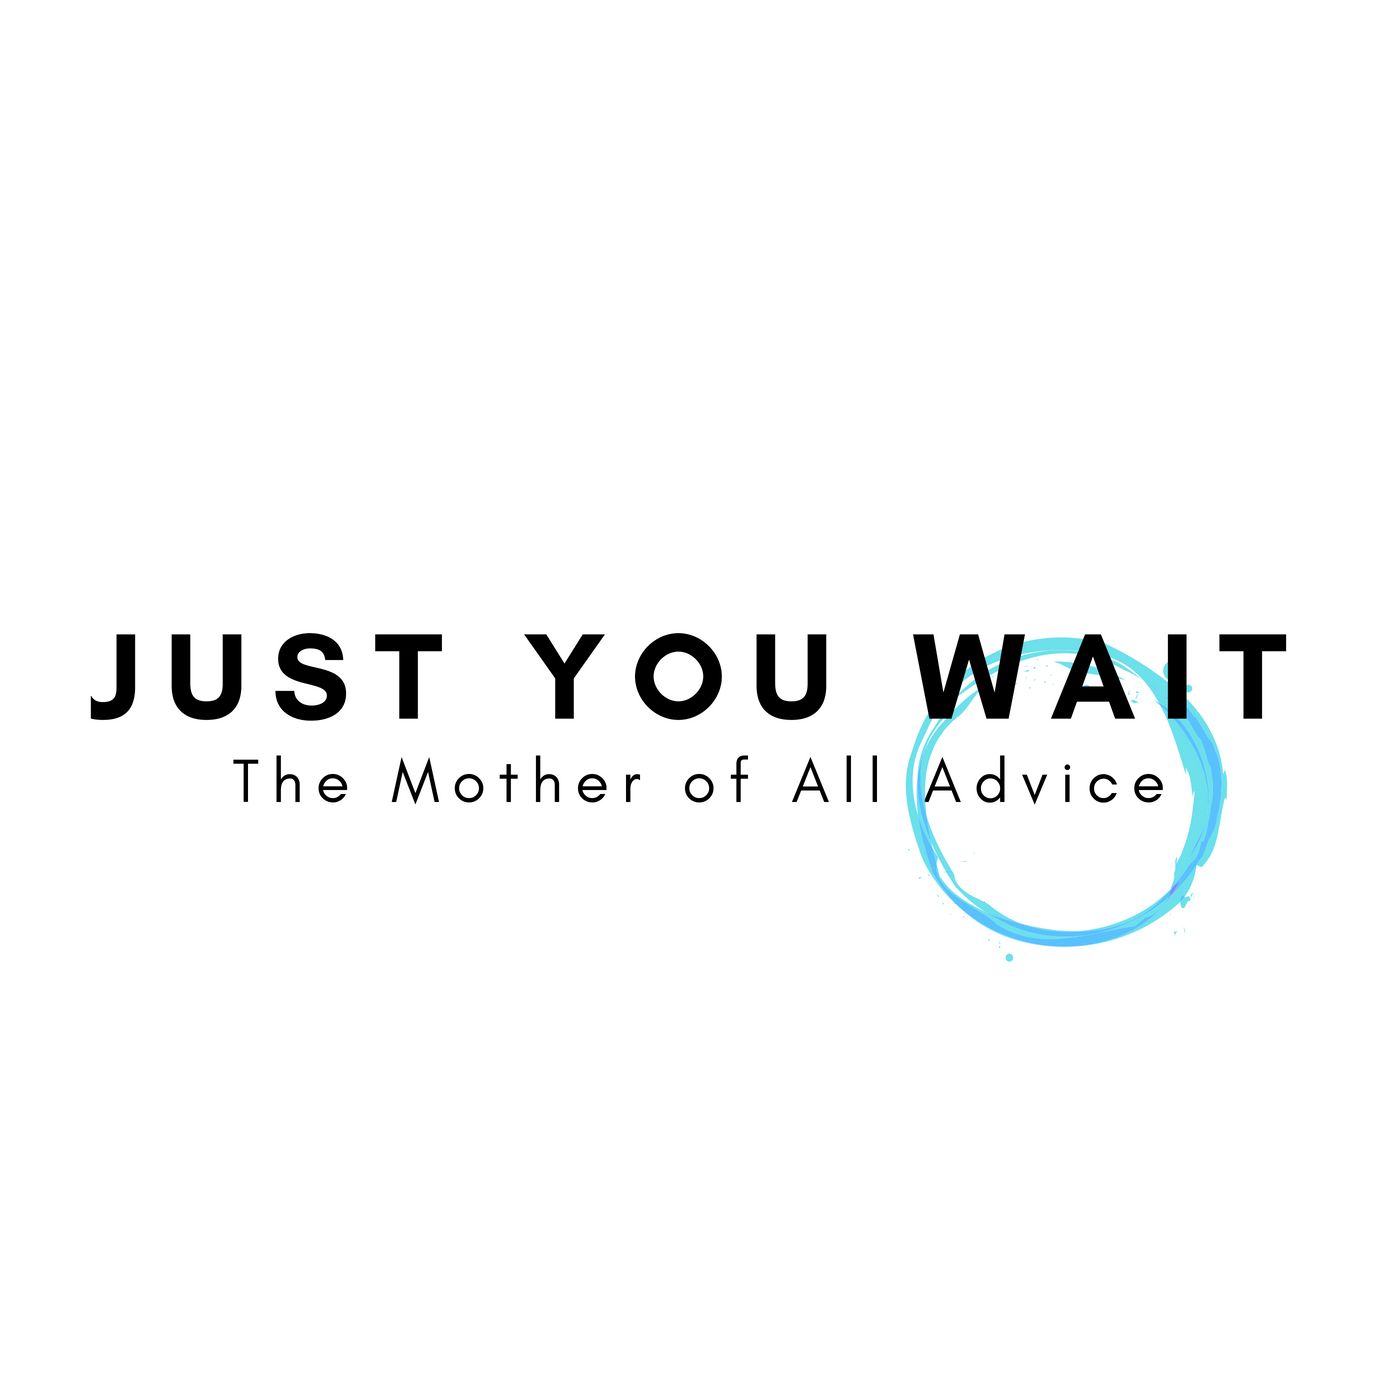 Just You Wait- The Mother of All Advice